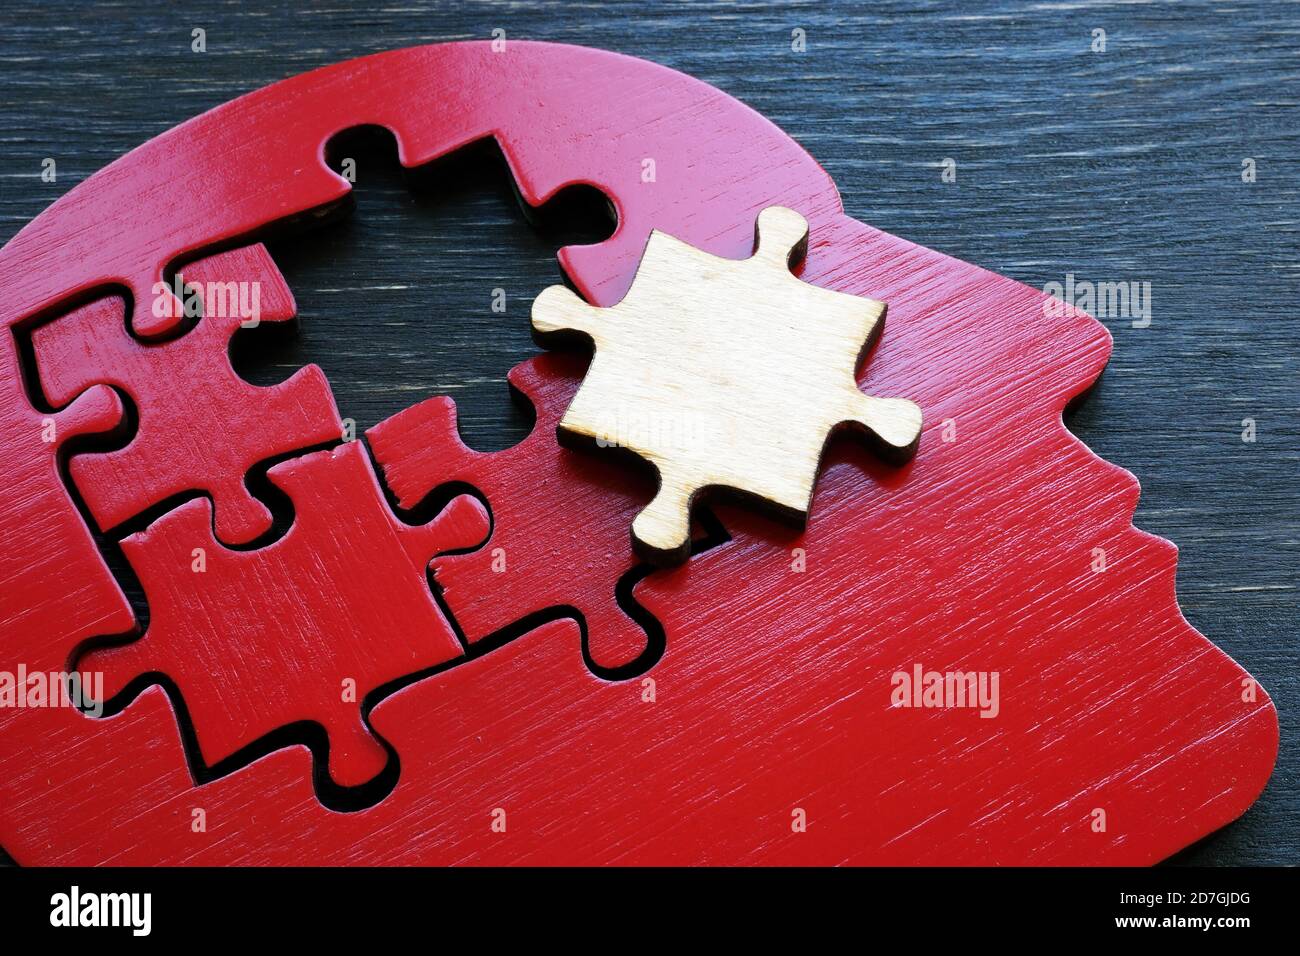 Brain problems or mental illness. The shape of a human head with a puzzle piece. Stock Photo